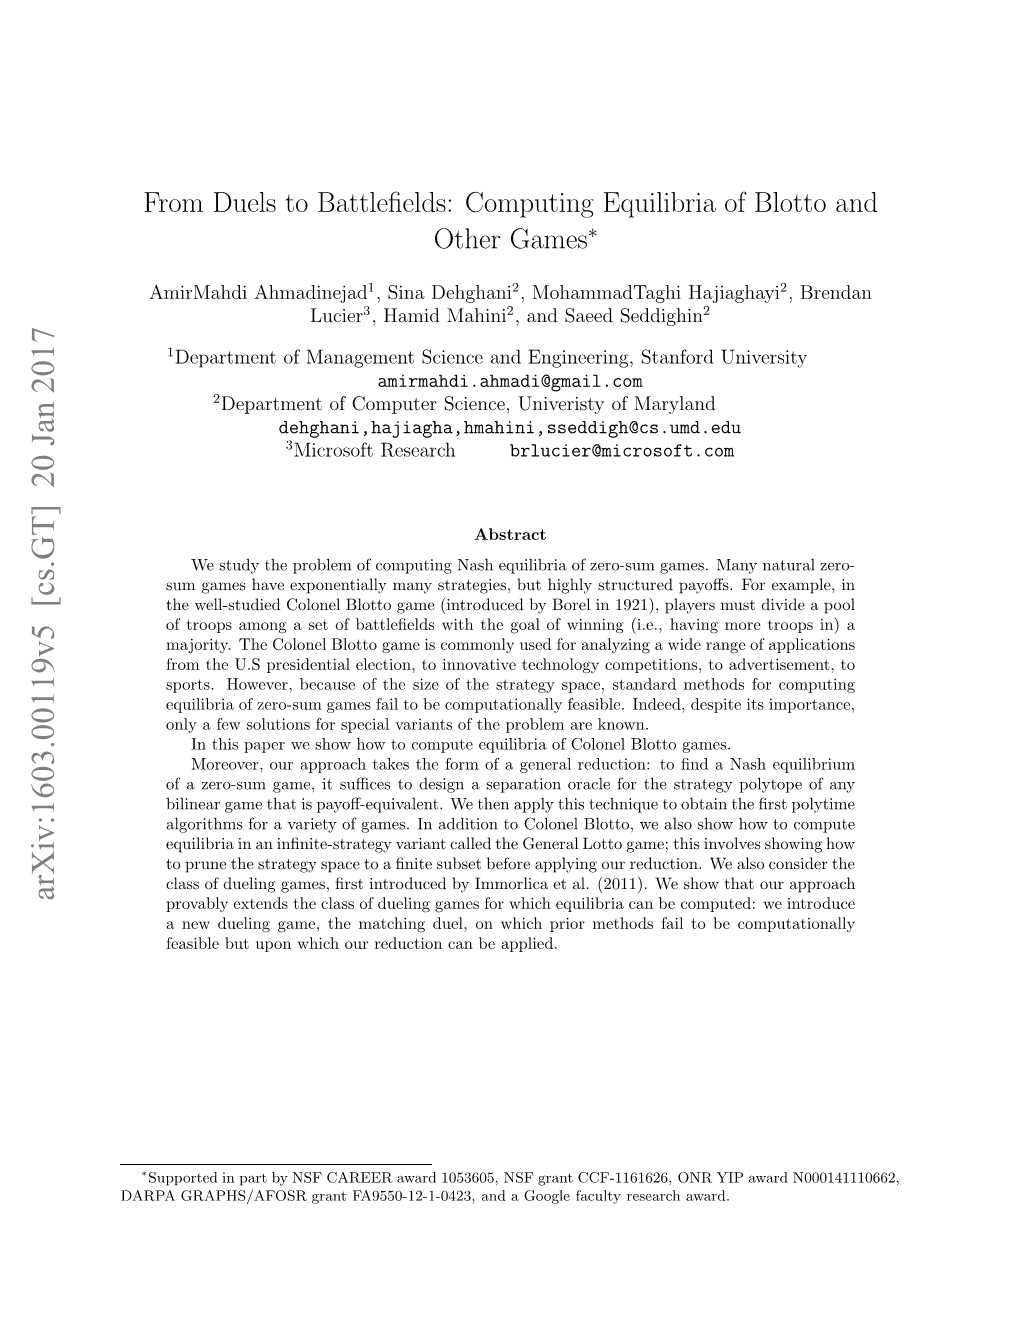 From Duels to Battefields: Computing Equilibria of Blotto and Other Games